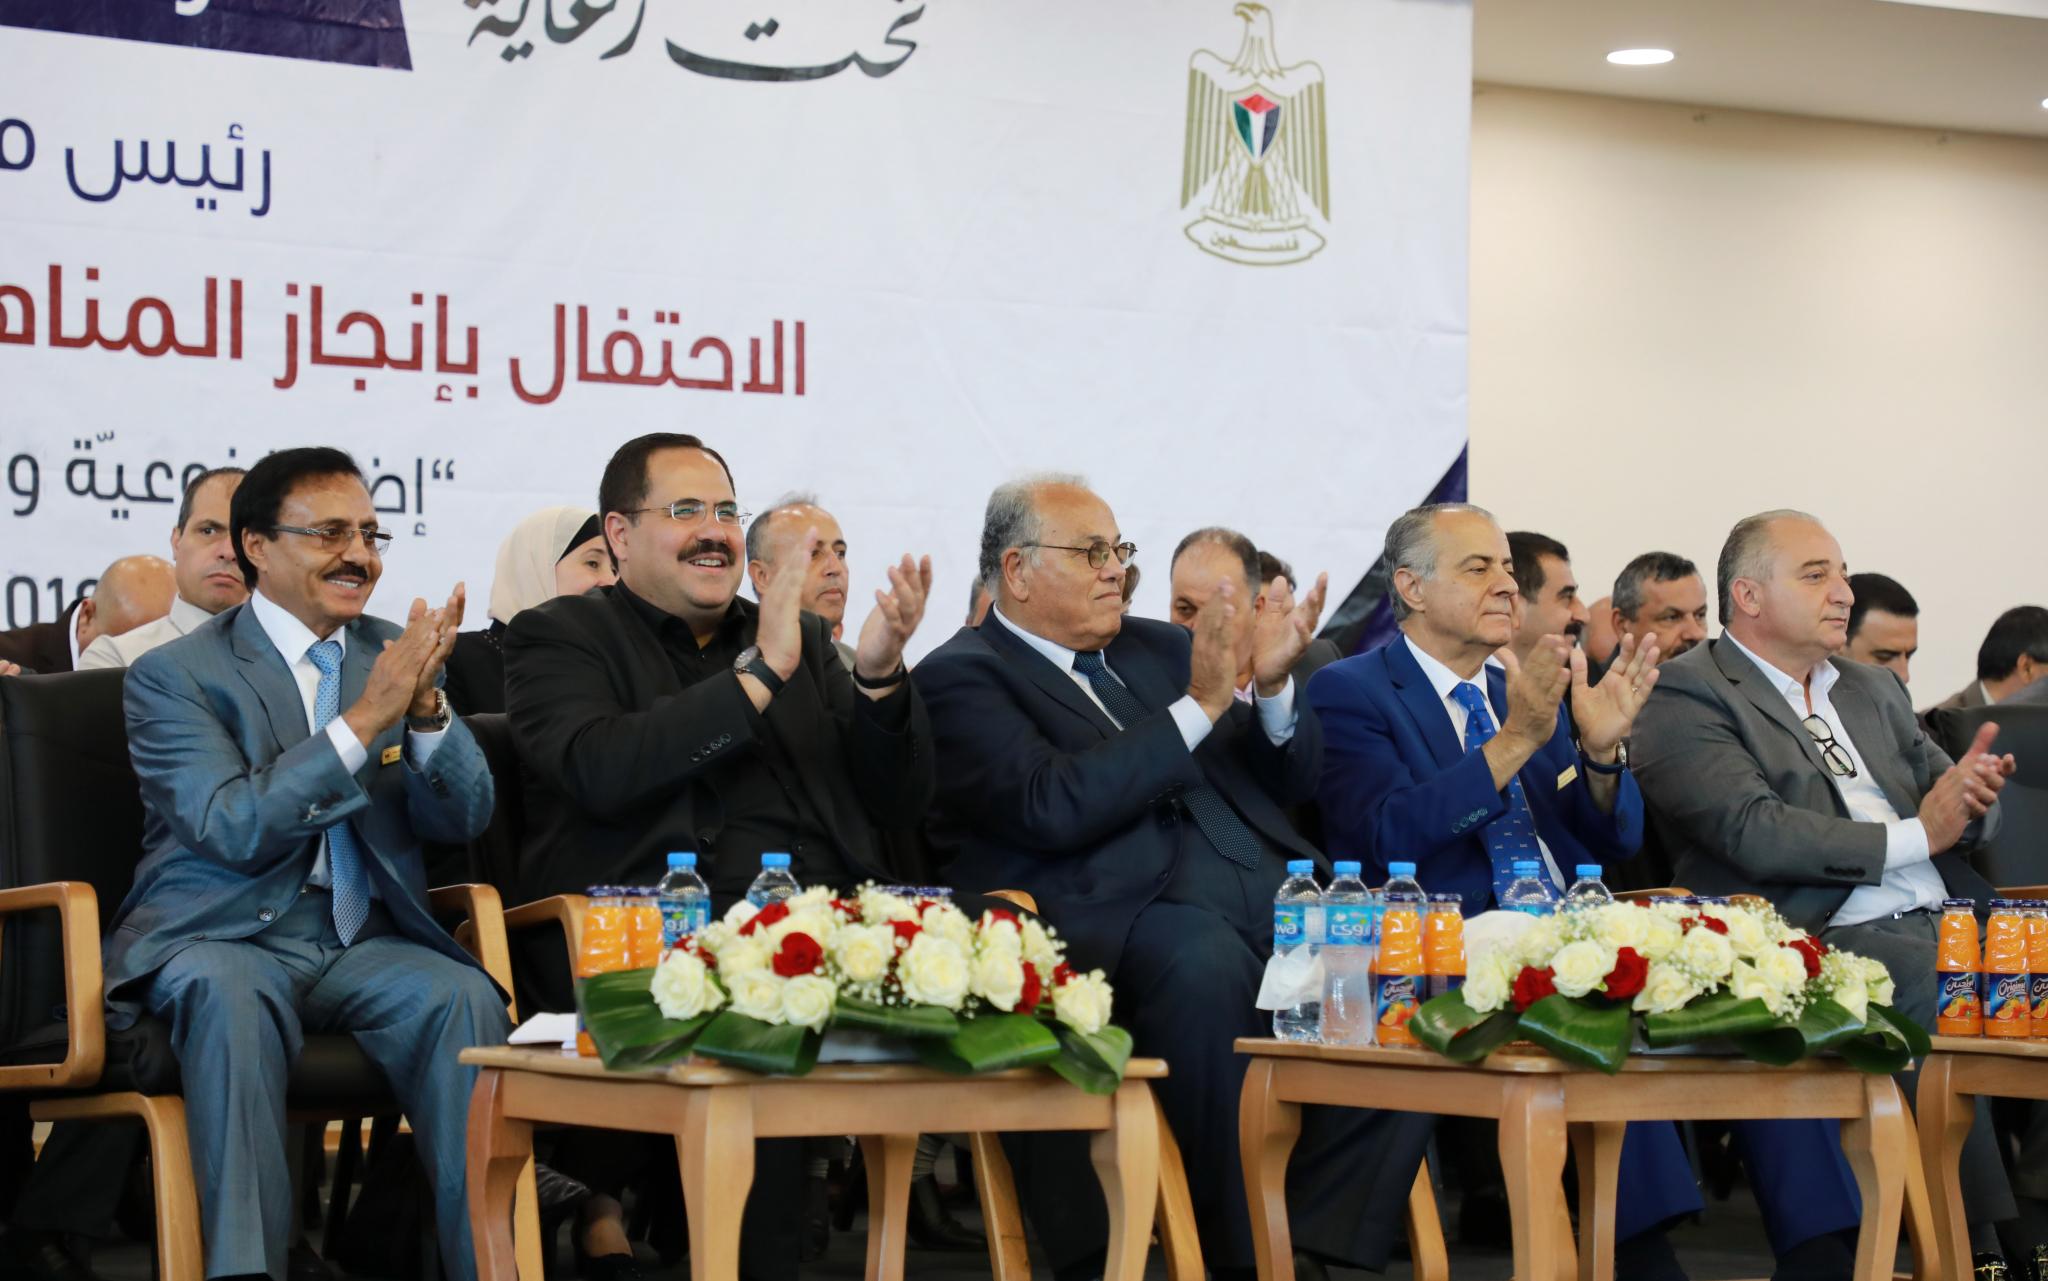 Part of the Ceremony of Palestinian Curriculum completion